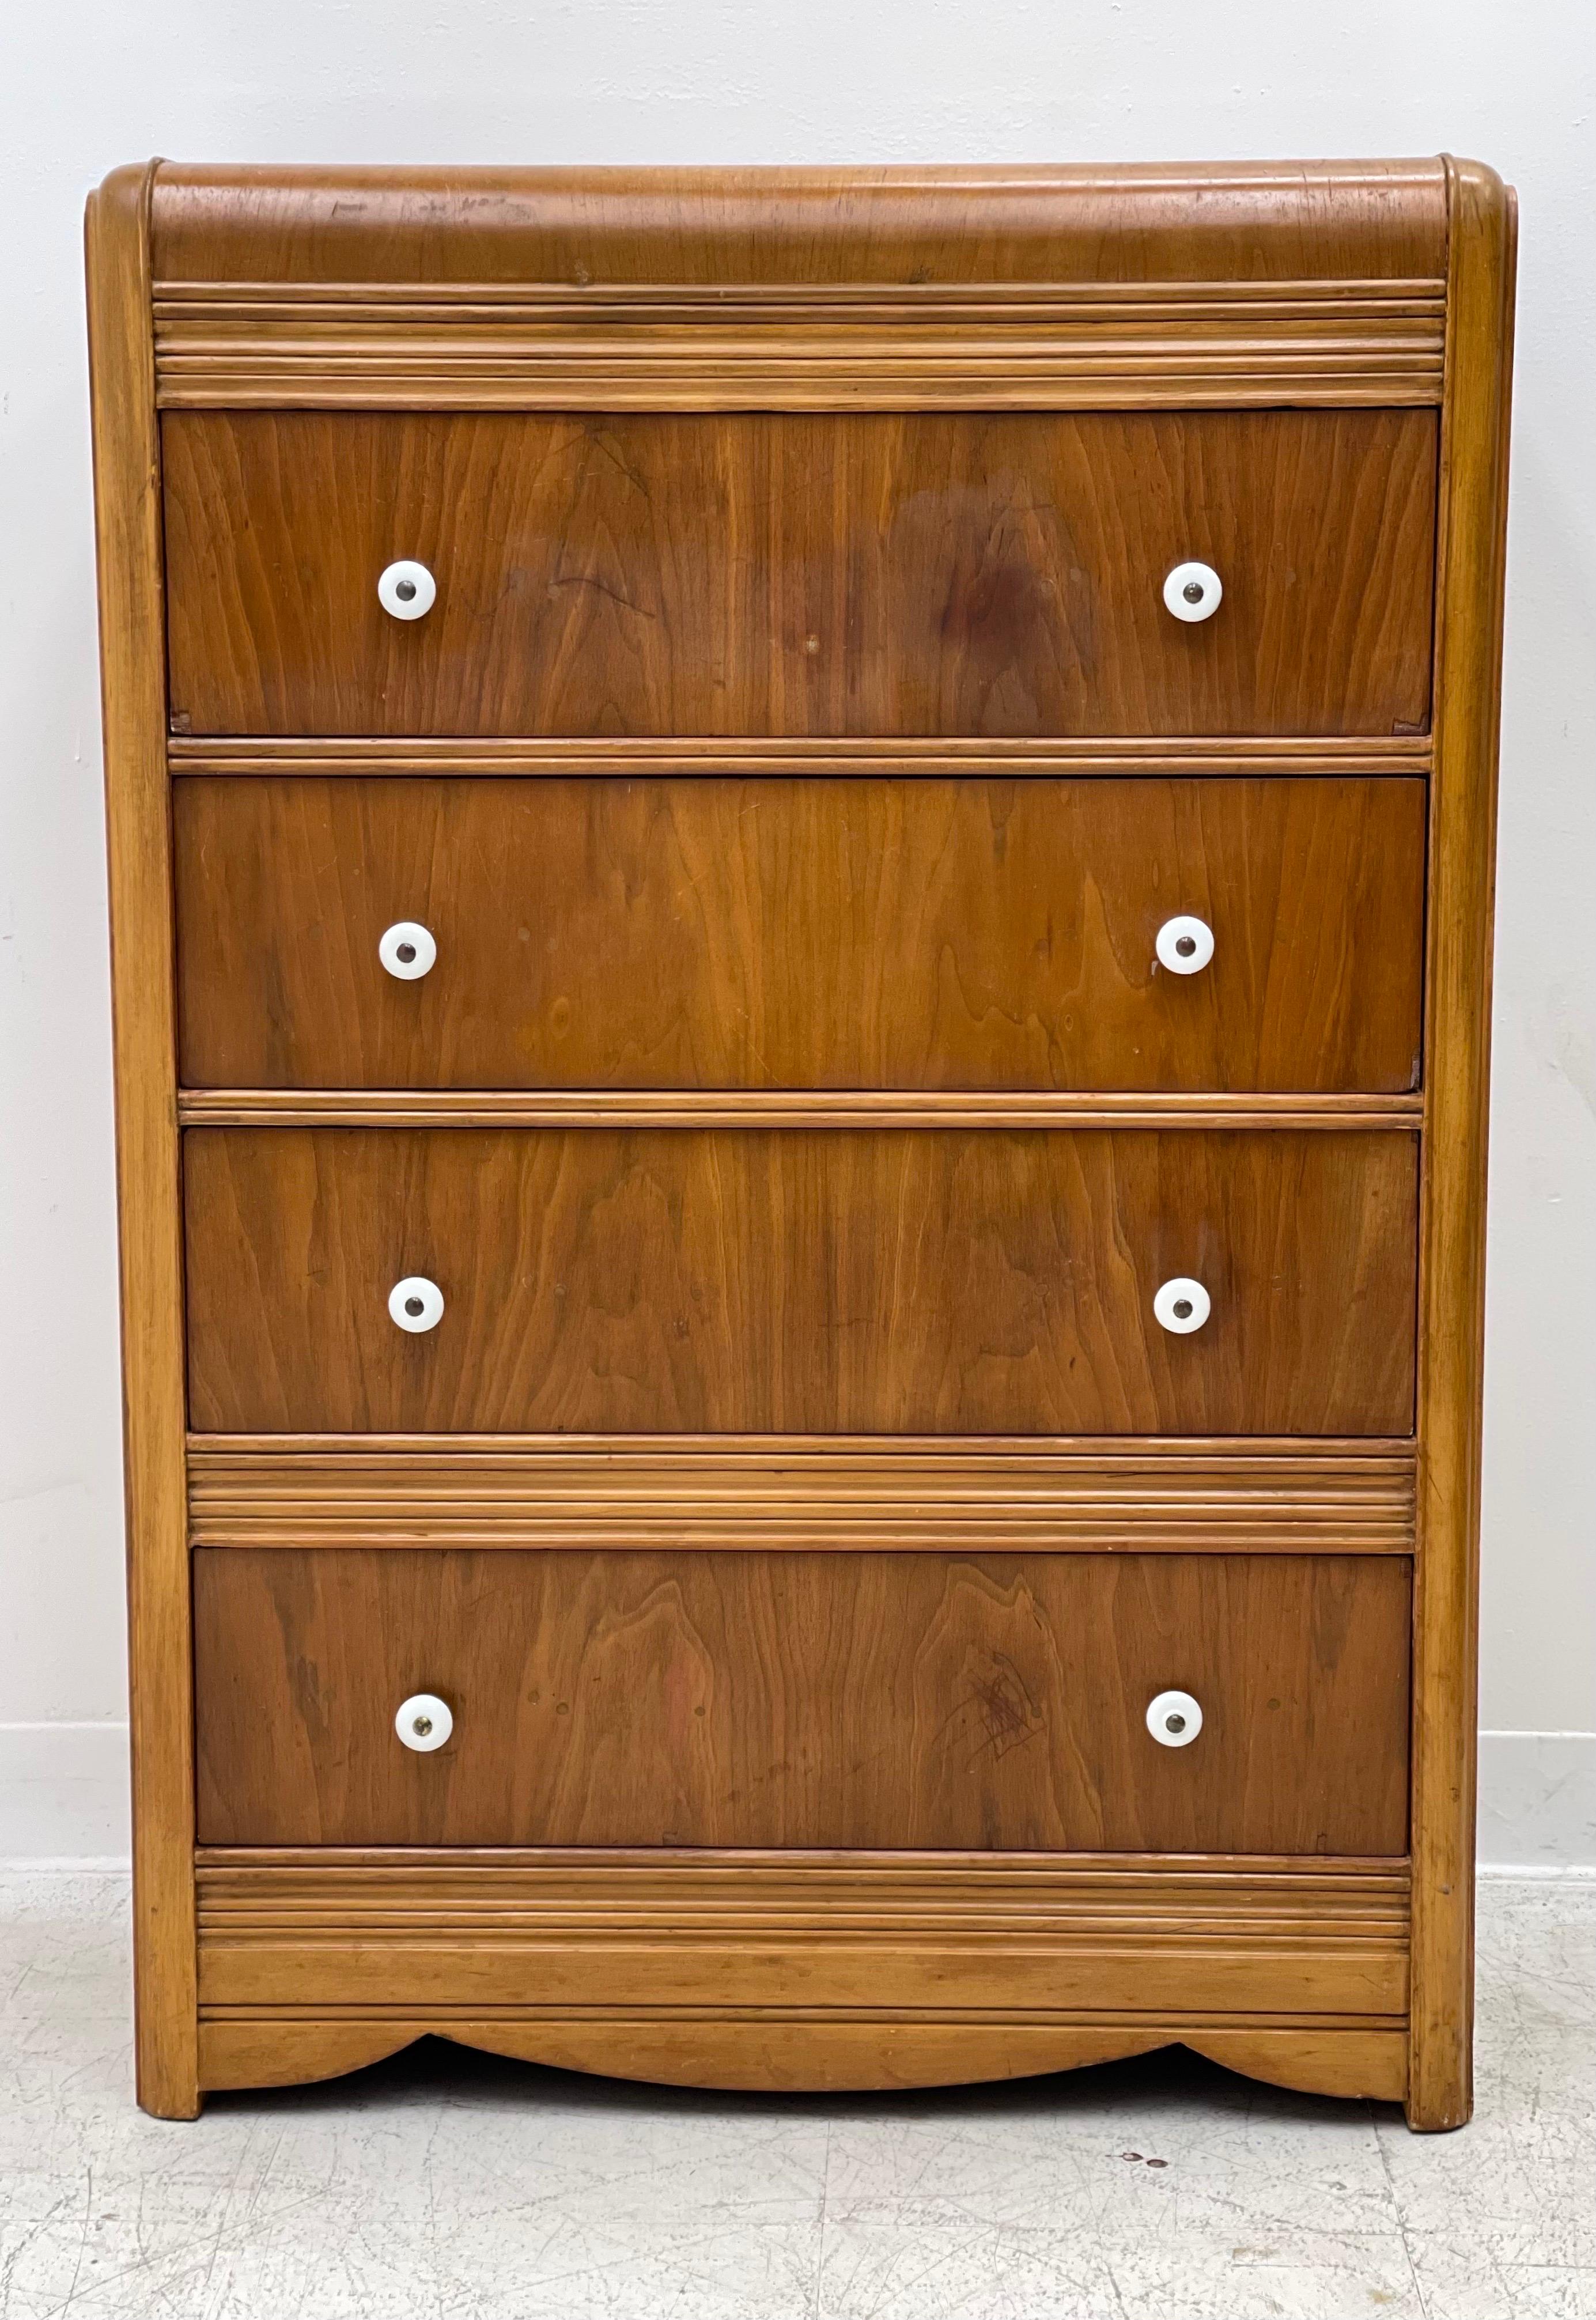 Vintage Waterfall Dresser Dovetail Drawers Cabinet Storage. Possible Original Hardware

Dimensions 30 W ; 18 D ; 42 1/2H